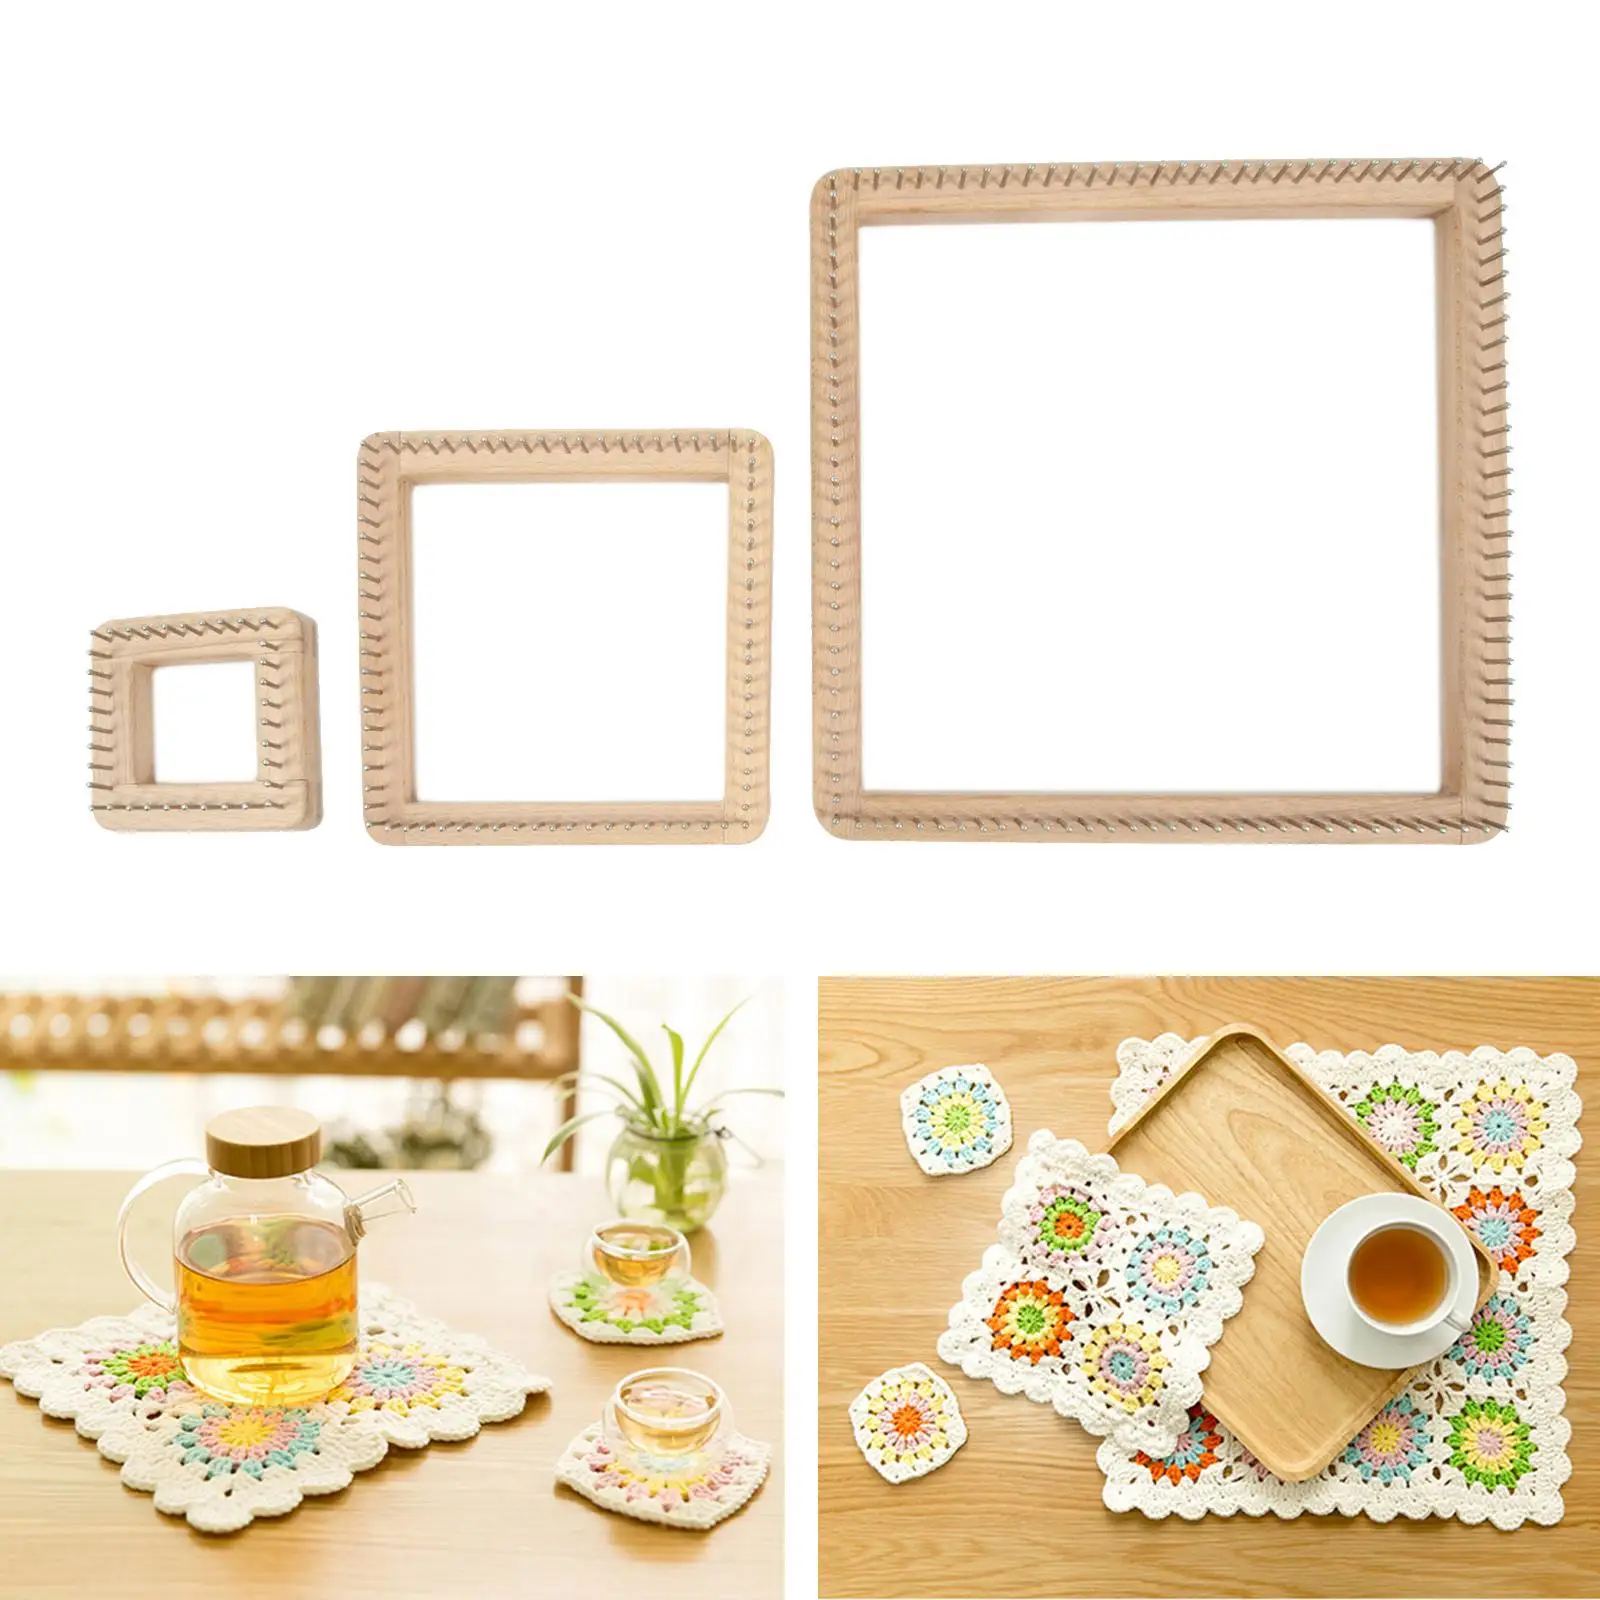 Square Knitting Loom Wooden Handcrafts Needlework Board DIY Pegs Accessories Multifunctional for Bags Sock Yarn Toys Children